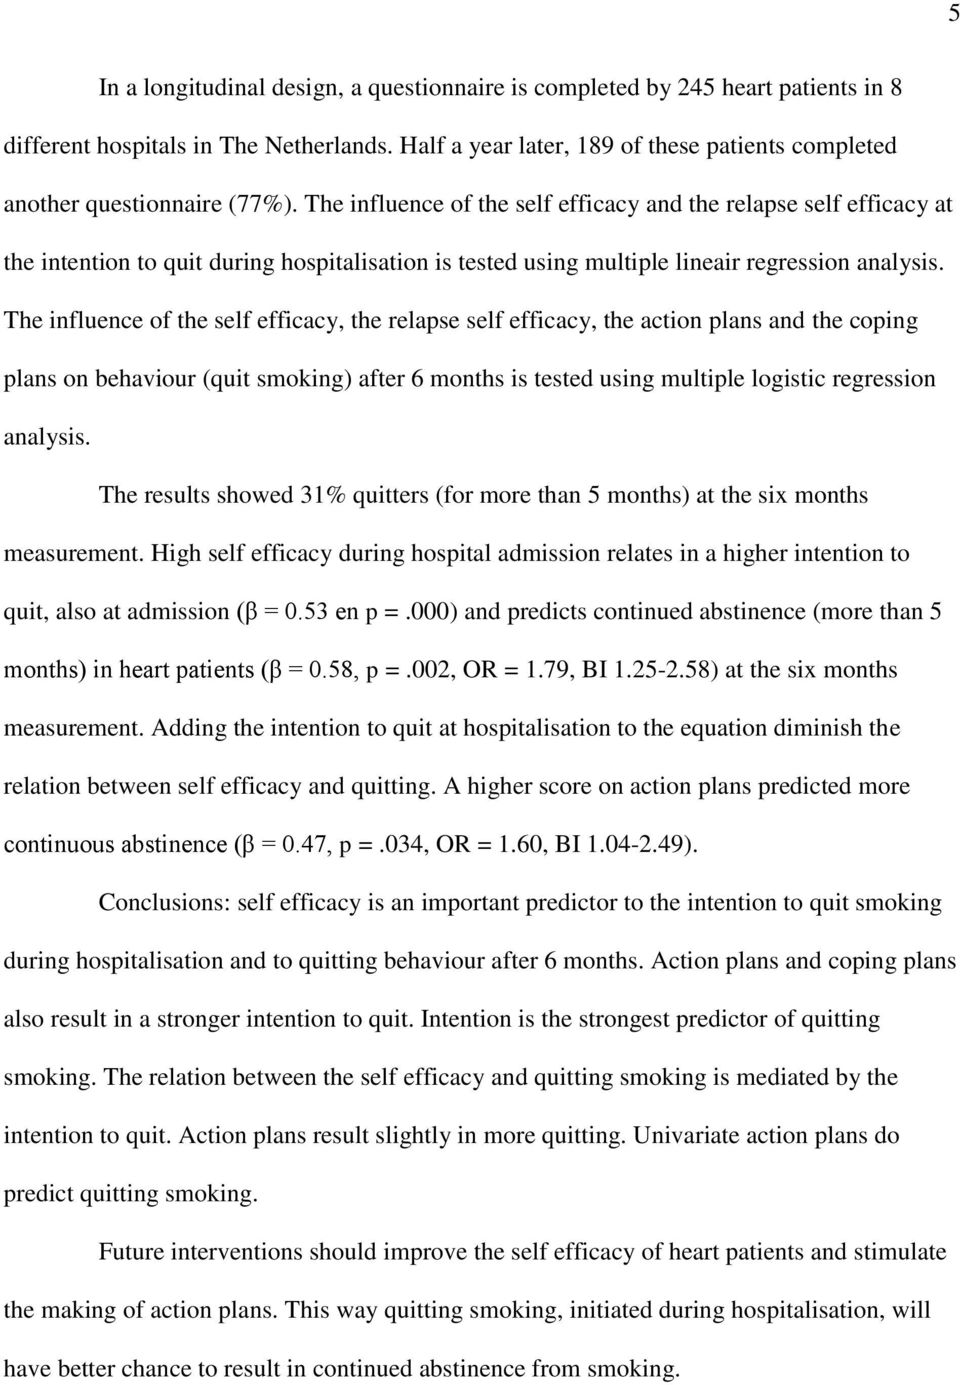 The influence of the self efficacy and the relapse self efficacy at the intention to quit during hospitalisation is tested using multiple lineair regression analysis.